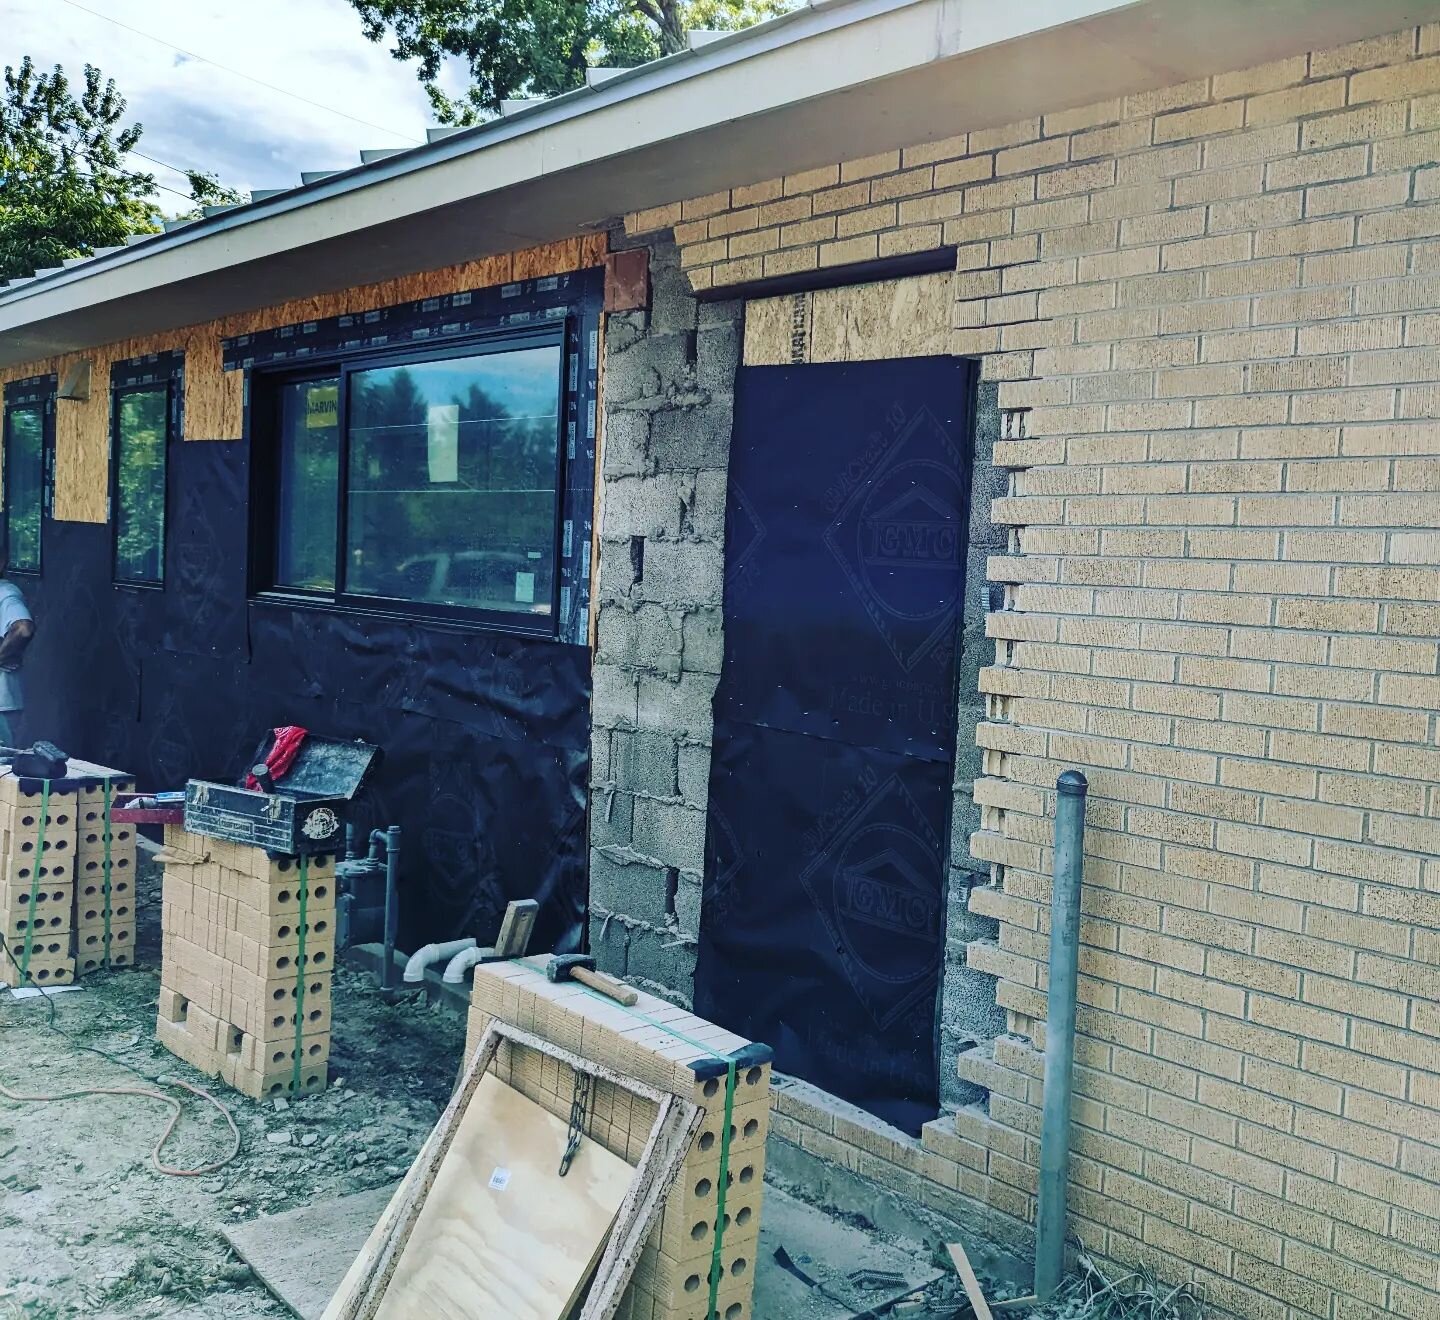 Tying in new to old for this addition, mixing masonry with wood framing, new foundation to old, and making it seamless, tricky on the engineering but even more so on the masons, framers, finishers! Excited to see this come together!